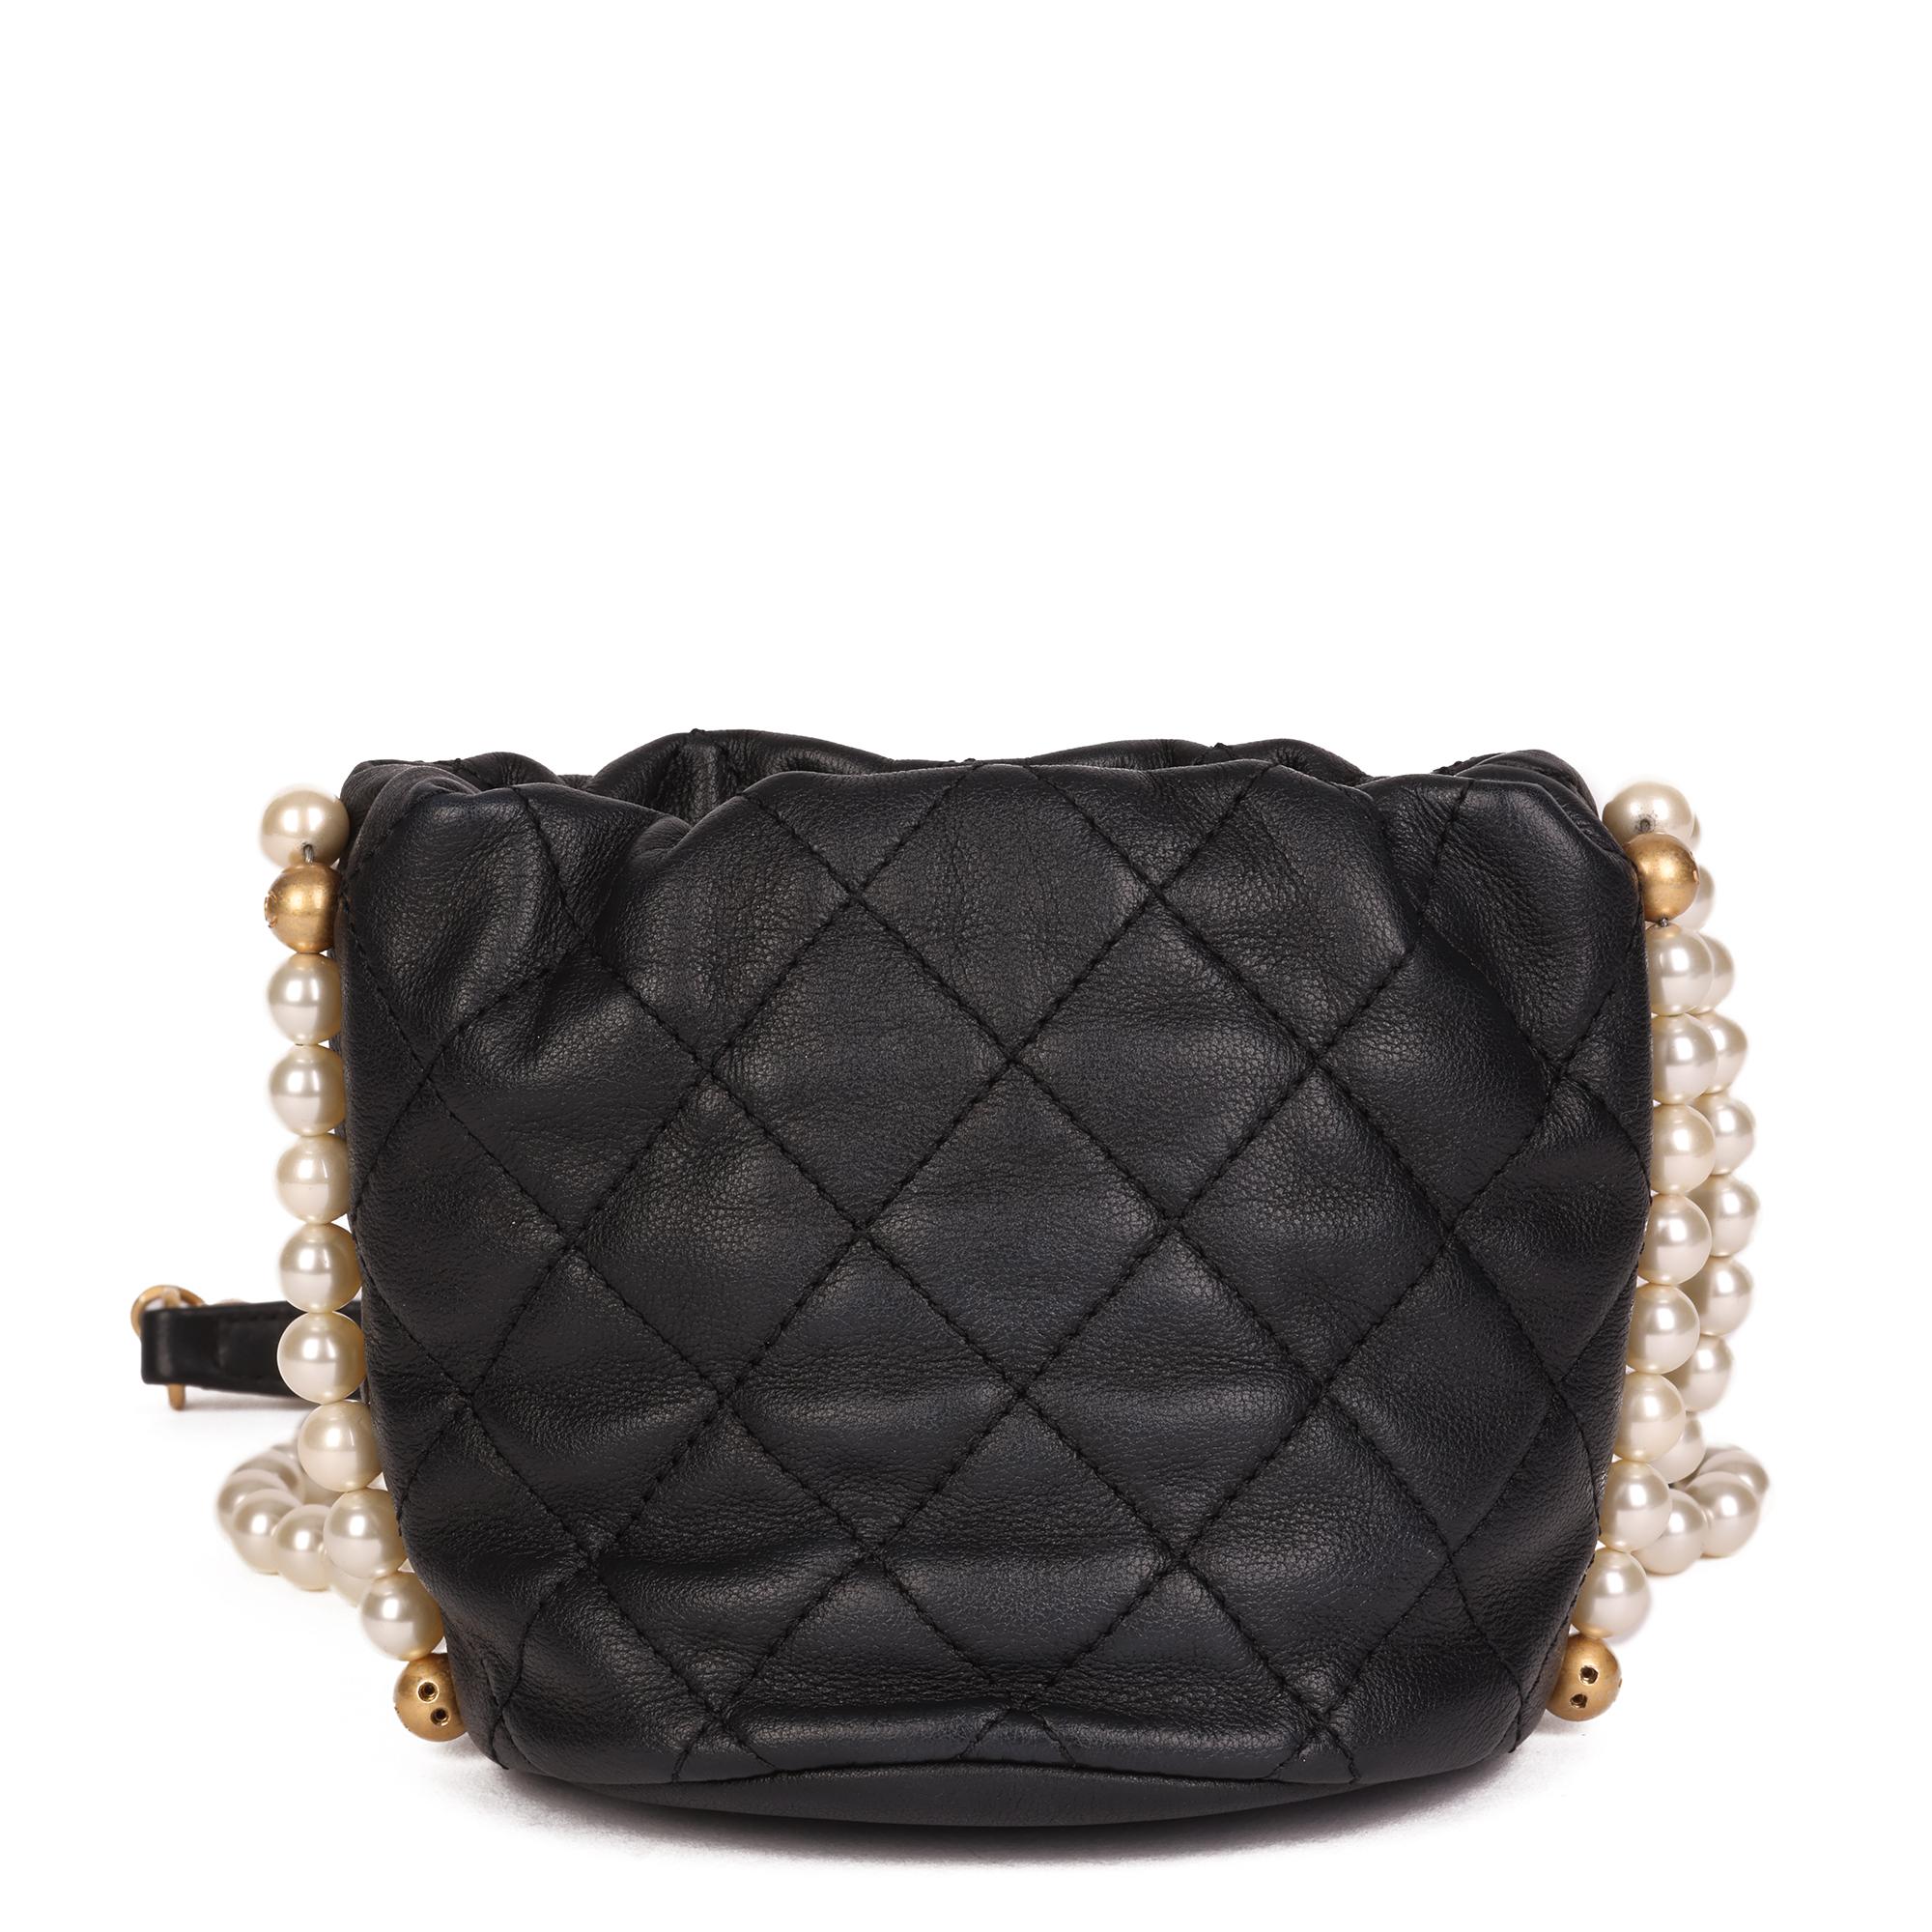 Chanel Black Quilted Calfskin Leather Pearl Micro Bucket Bag 5